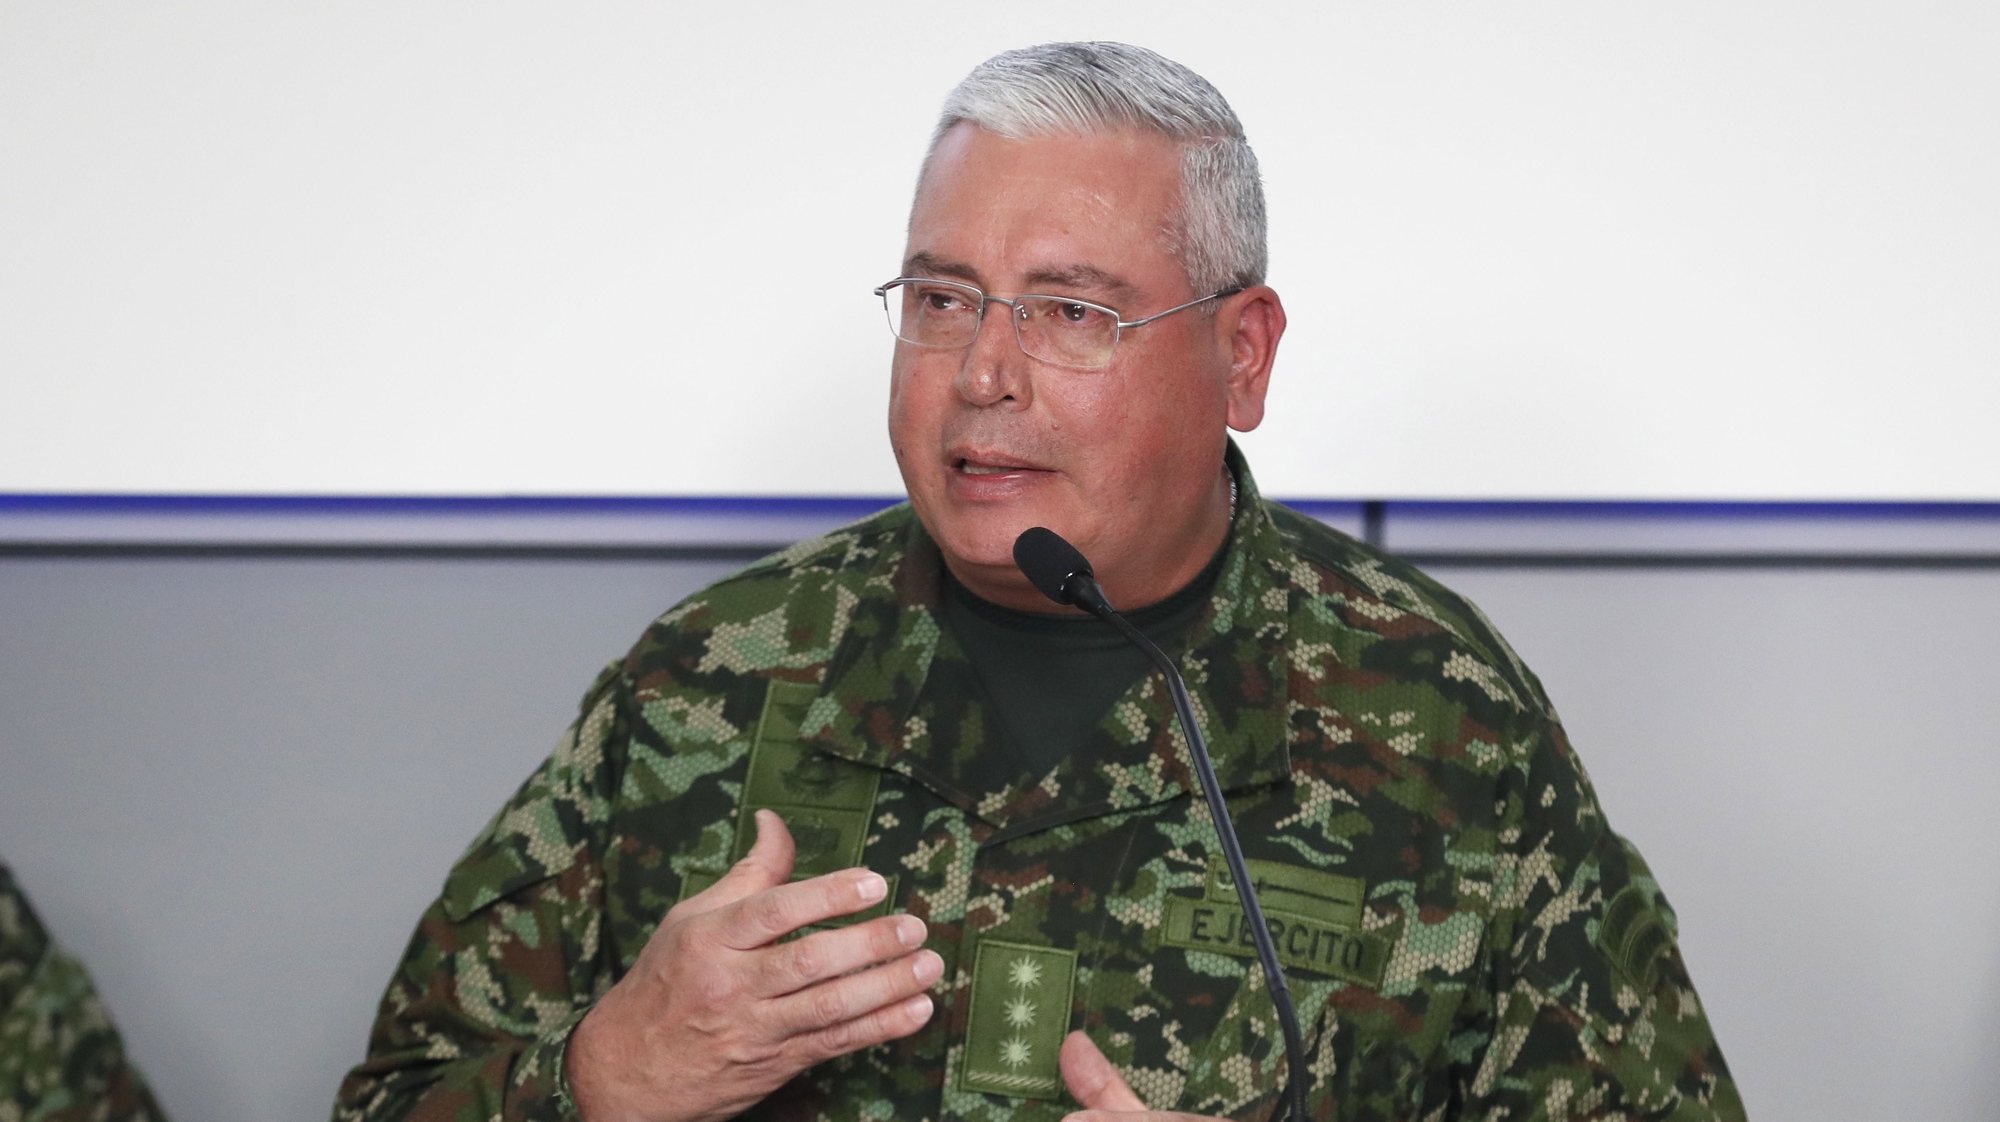 epa10323495 The commander of the Colombian Military Forces, Major General Helder Giraldo, speaks during a press conference, in Bogota, Colombia, 23 November 2022. The Minister of Defense, Ivan Velasquez, assured this 23 November that the reestablishment of peace negotiations with the guerrillas of the National Liberation Army (ELN) does not mean a &#039;lowering of guard or actions on the part of the Armed Forces&#039;, but rather work continues &#039;with all intensity&#039;.  EPA/Carlos Ortega